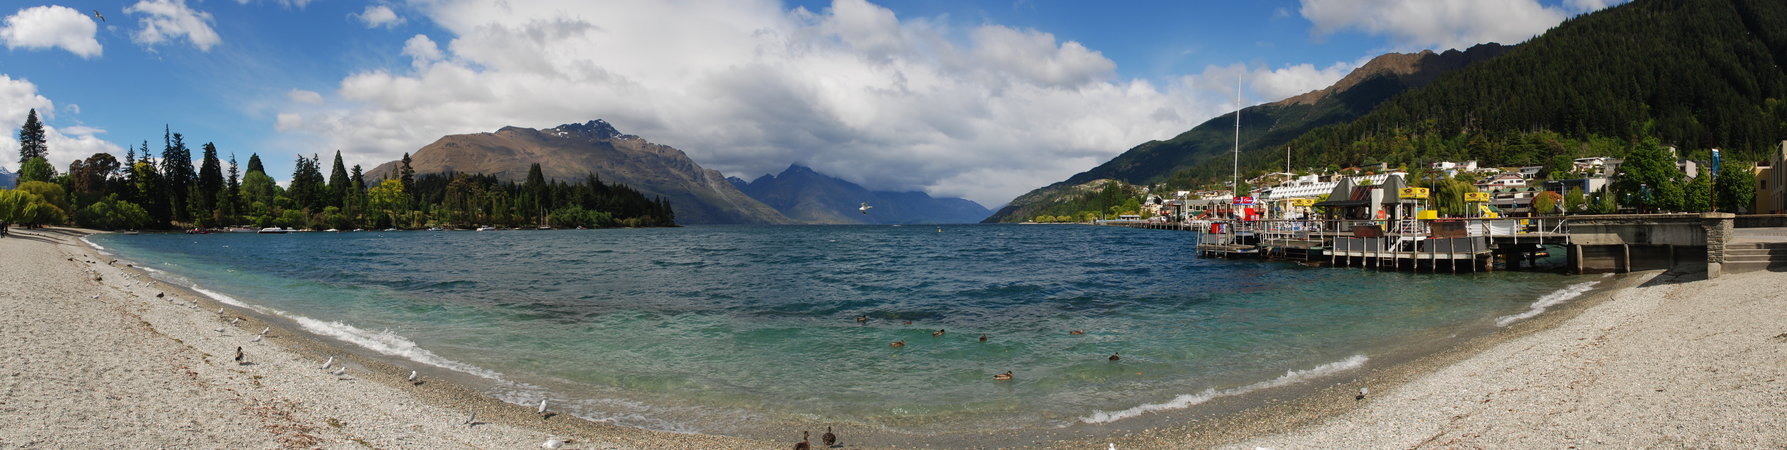 Queenstown Bay (panorama)